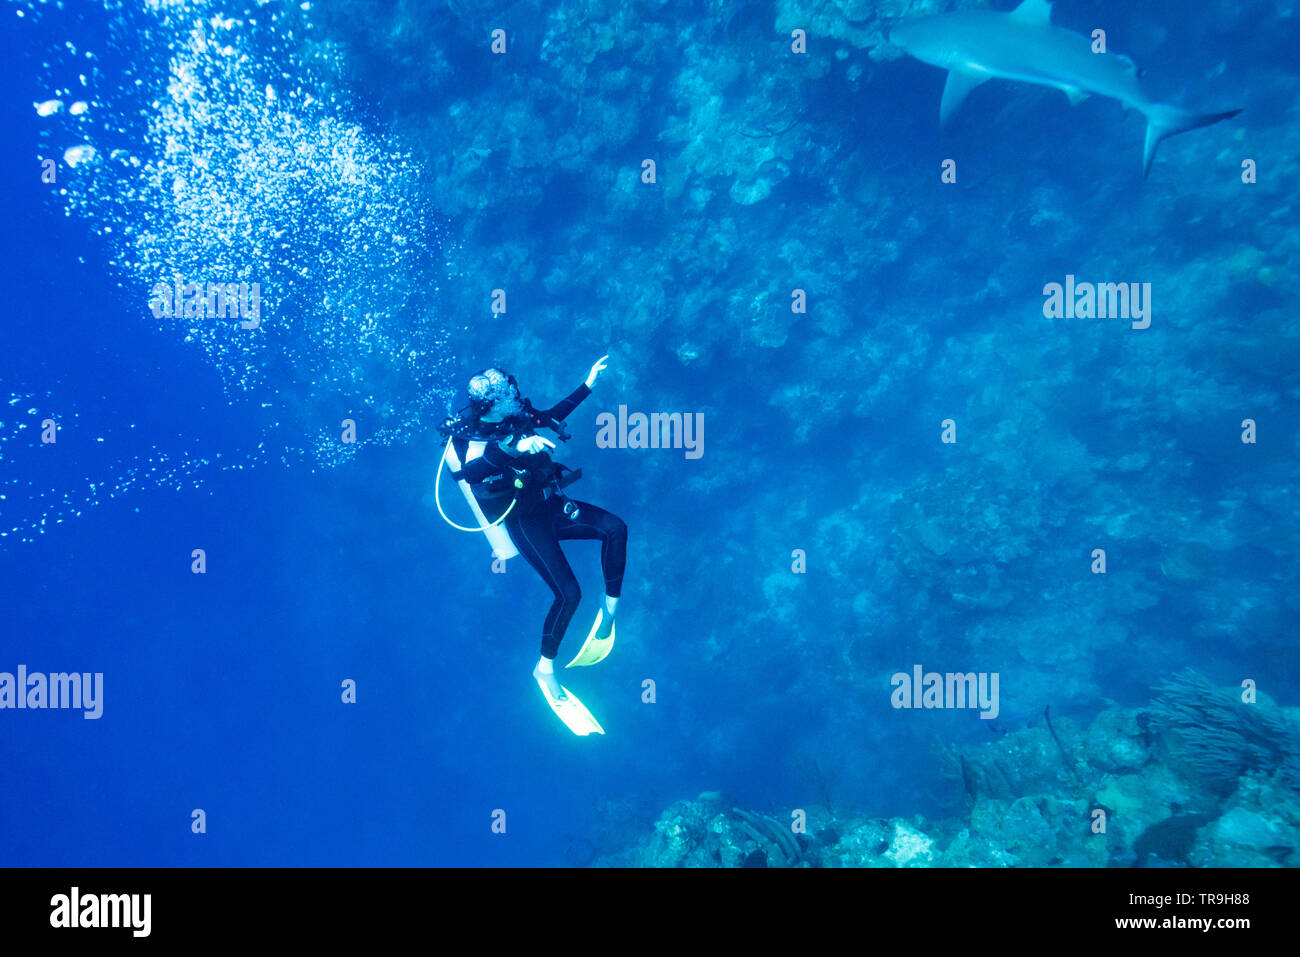 Scuba diver and Grey Reef Shark (Carcharhinus amblyrhynchos) under water, Tarpon Cayes, Belize Barrier Reef, Lighthouse Reef, Belize Stock Photo